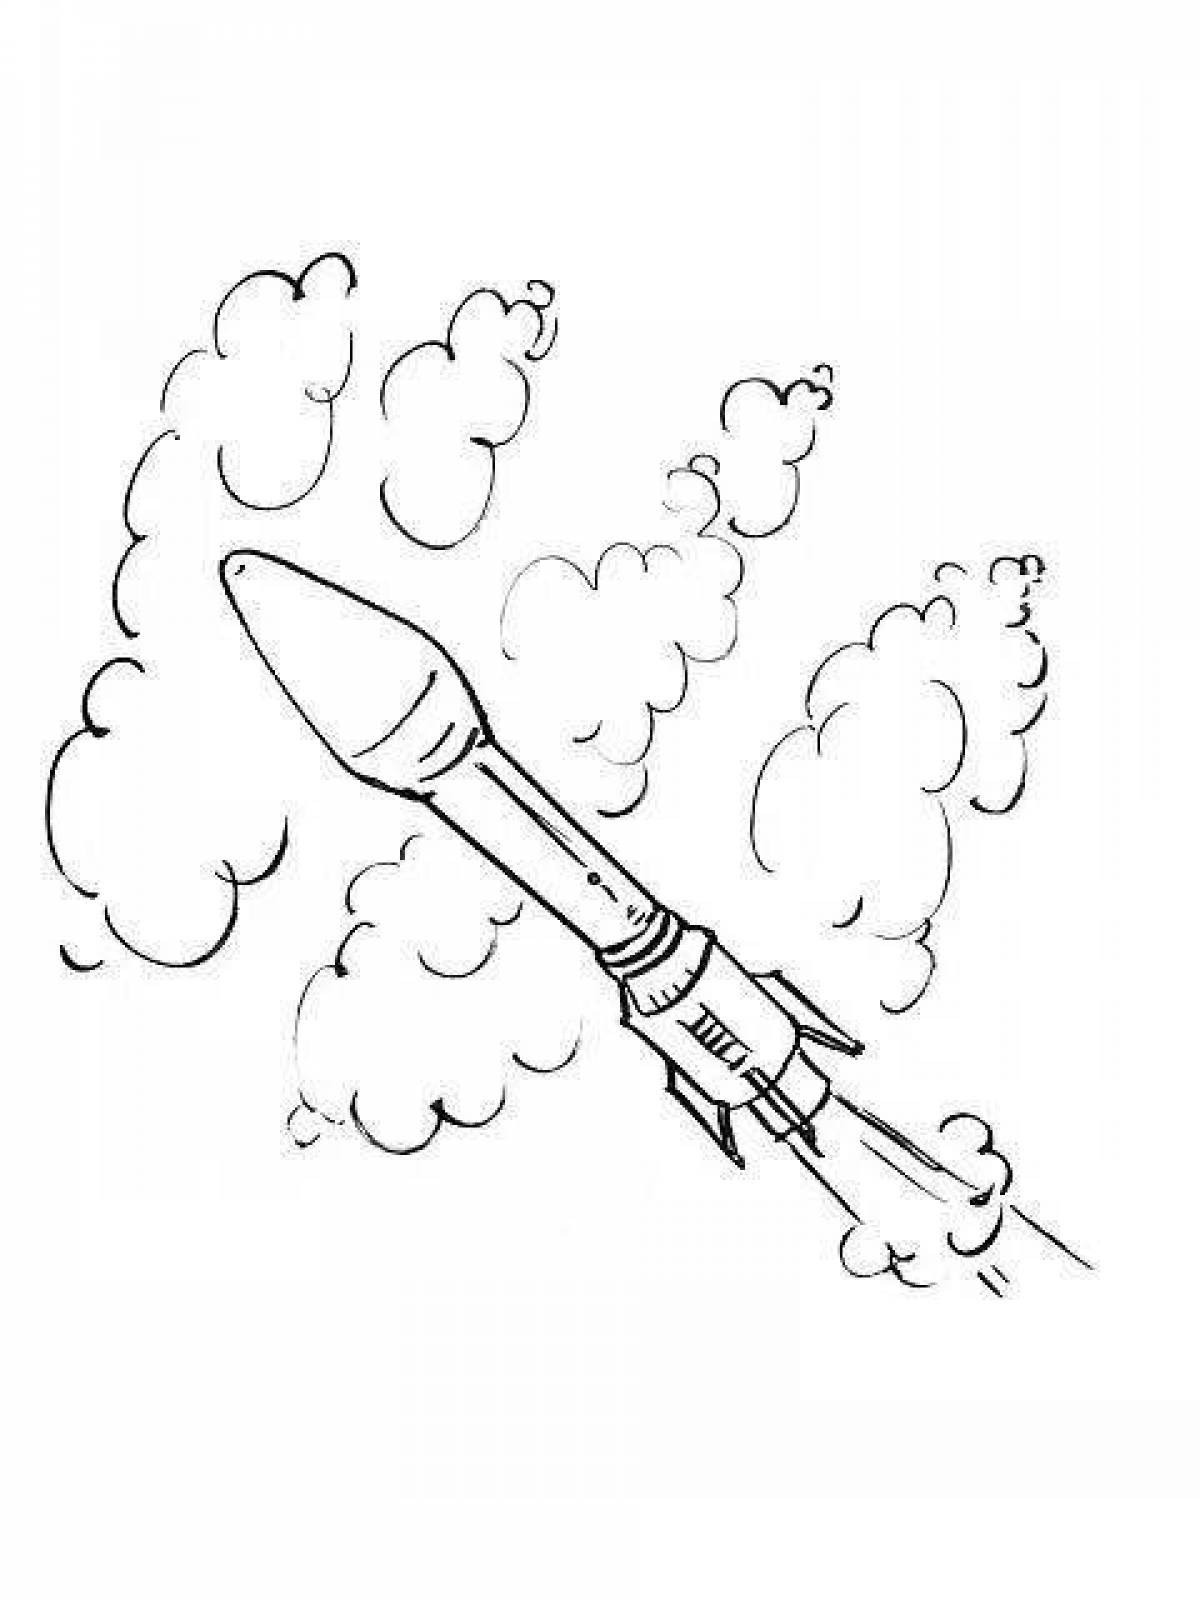 Radiant rocket launcher coloring page